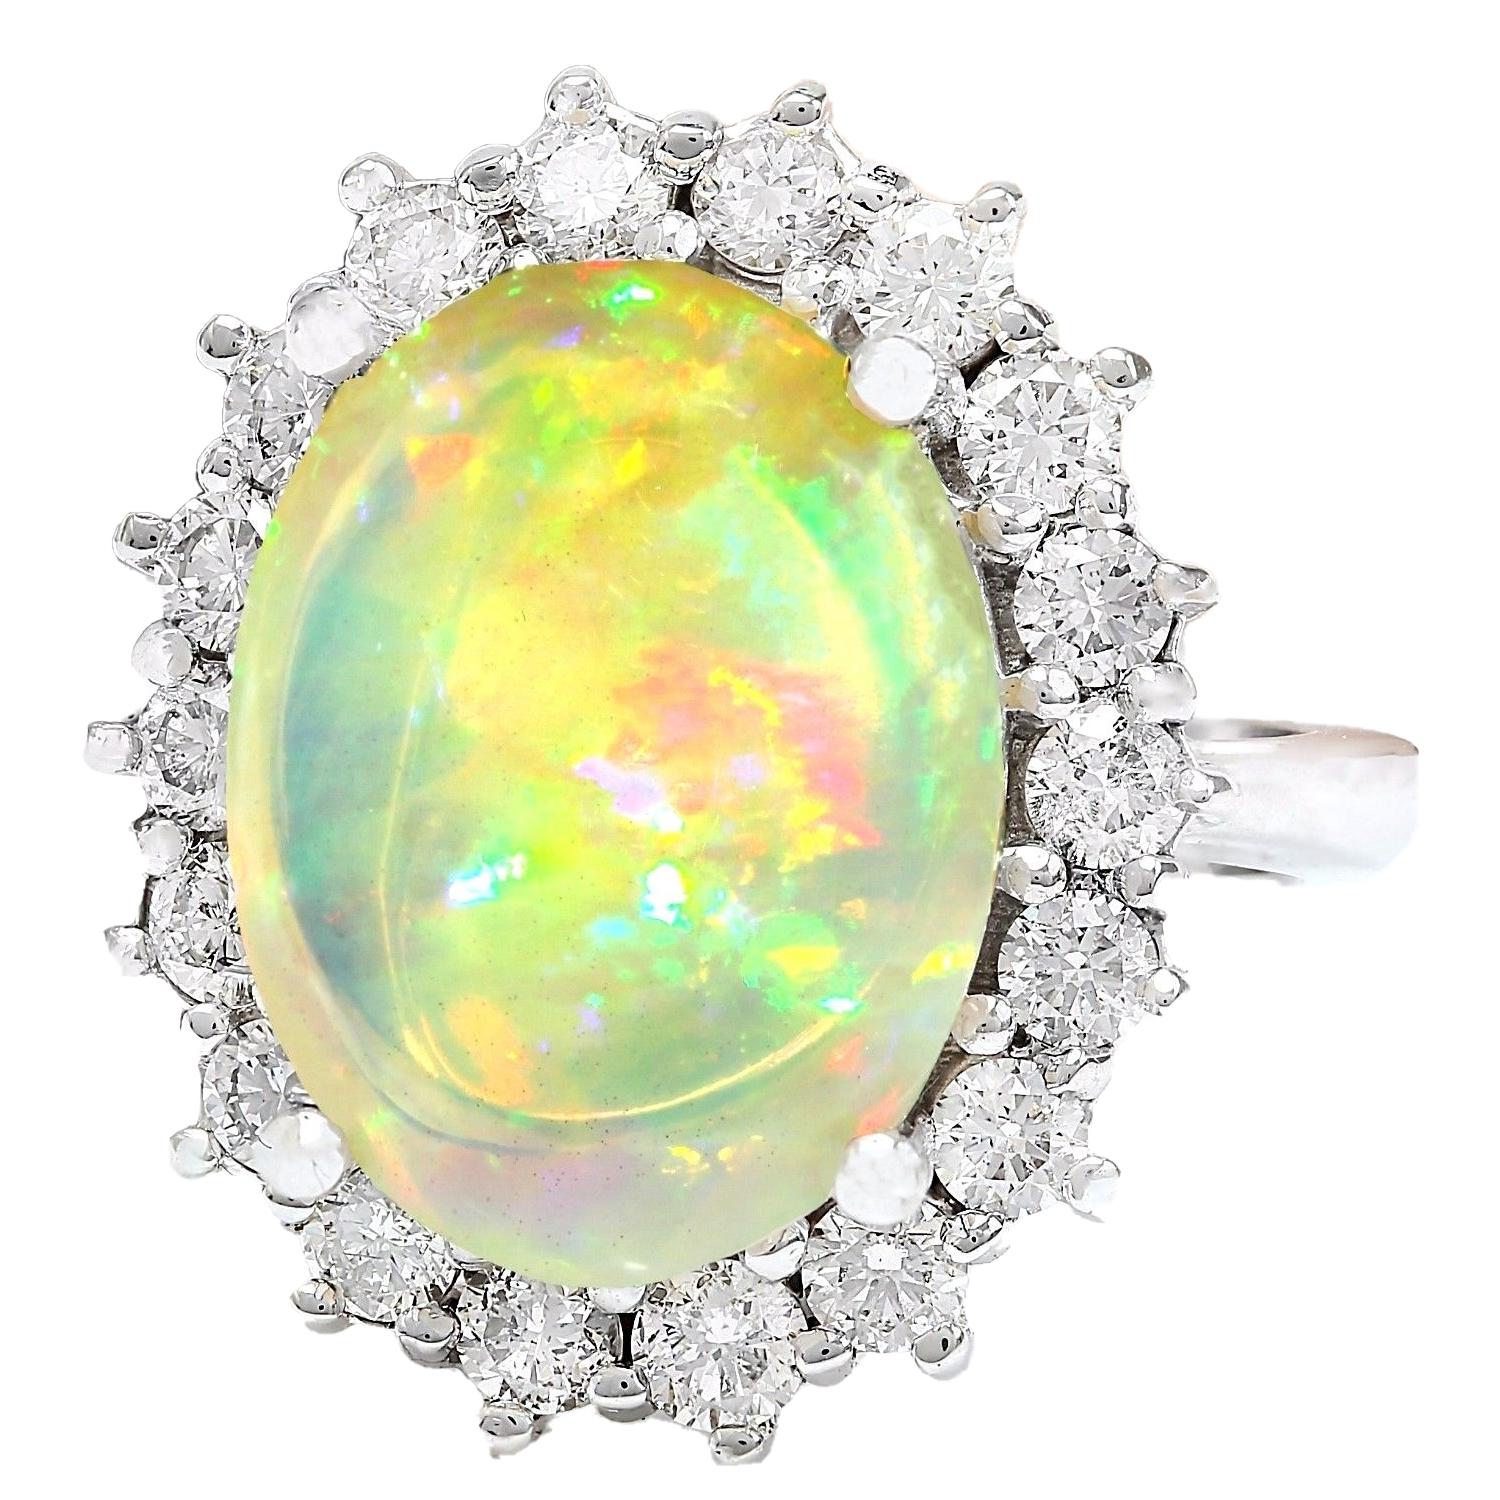 13.10 Carat Natural Opal 14K Solid White Gold Diamond Ring
 Item Type: Ring
 Item Style: Cocktail
 Material: 18K White Gold
 Mainstone: Opal
 Stone Color: Multicolor
 Stone Weight: 11.70 Carat
 Stone Shape: Oval
 Stone Quantity: 1
 Stone Dimensions: